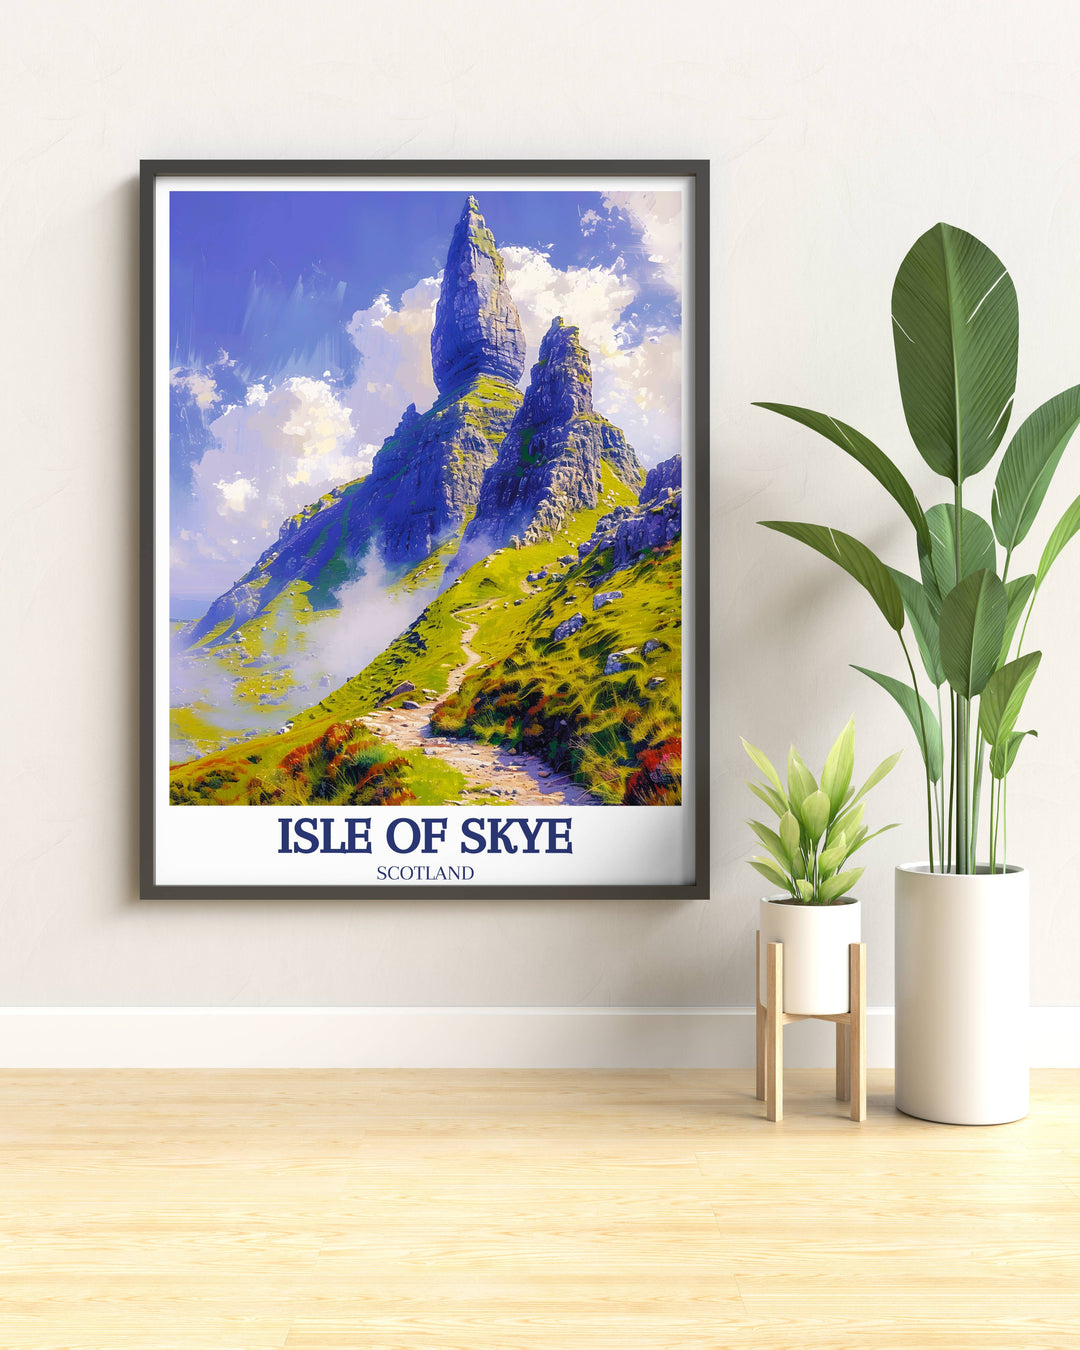 A dramatic Isle of Skye artwork highlighting the imposing silhouette of The Storr against a stormy sky, ideal for adding a dramatic touch to any rooms decor.